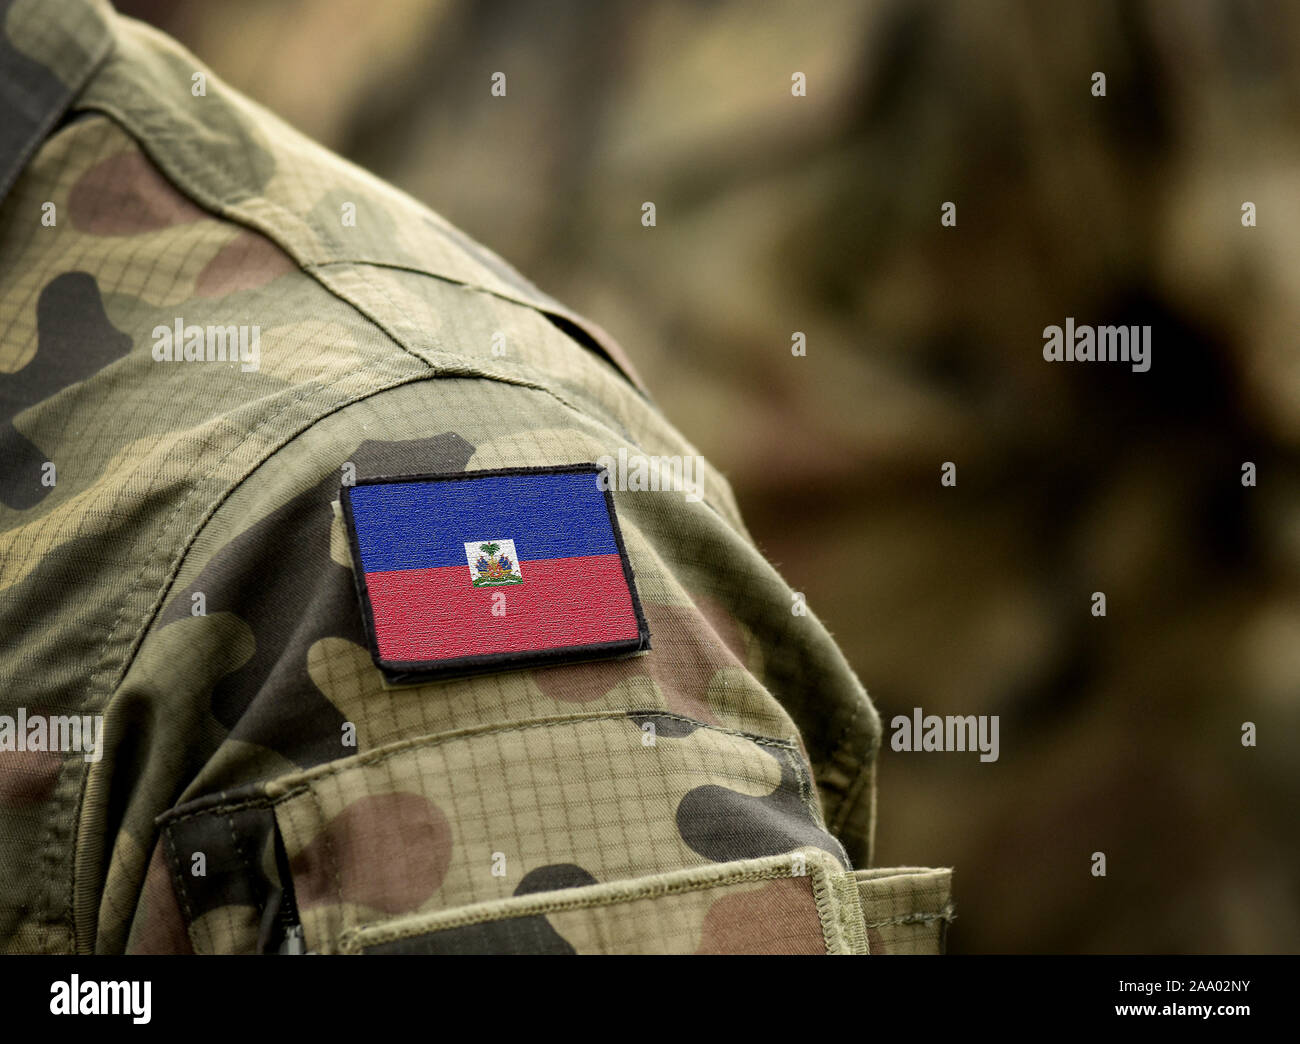 Flag of Haiti on military uniform. Army, armed forces, soldiers. Collage. Stock Photo